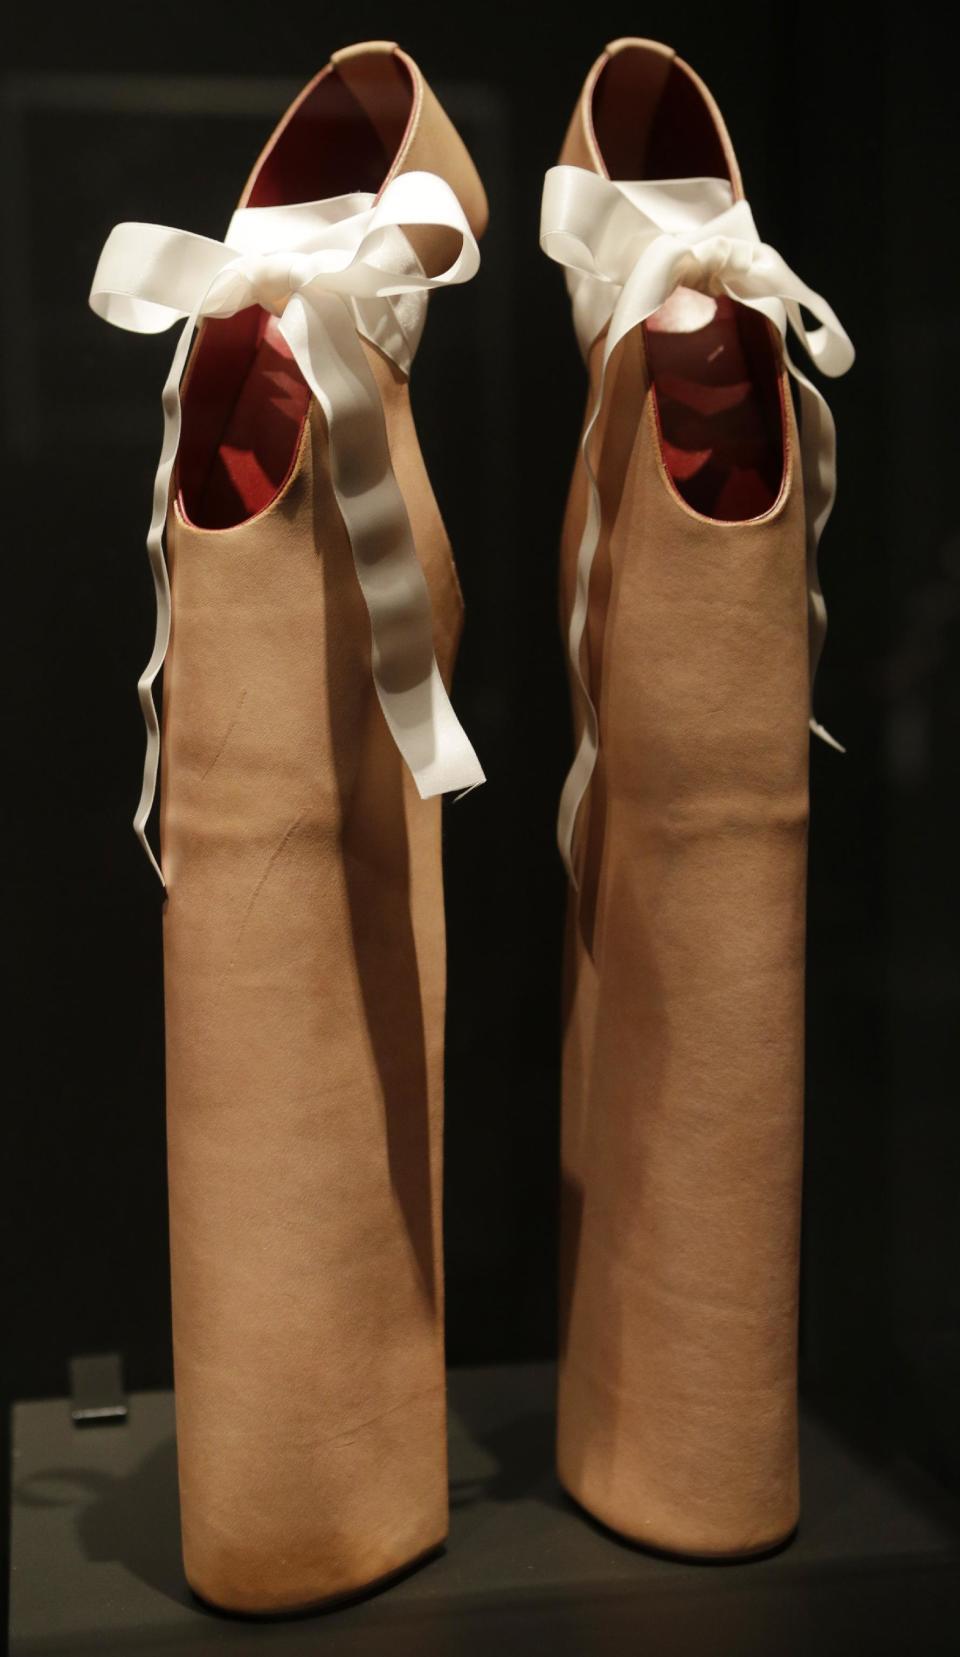 This Feb. 11, 2013 photo shows a pair of shoes designed by Noritake Tatehana for Lady Gaga displayed at the "Shoe Obsession" exhibit at The Museum at the Fashion Institute of Technology Museum in New York. The exhibition, showing off 153 specimens, runs through April 13. (AP Photo/Kathy Willens)